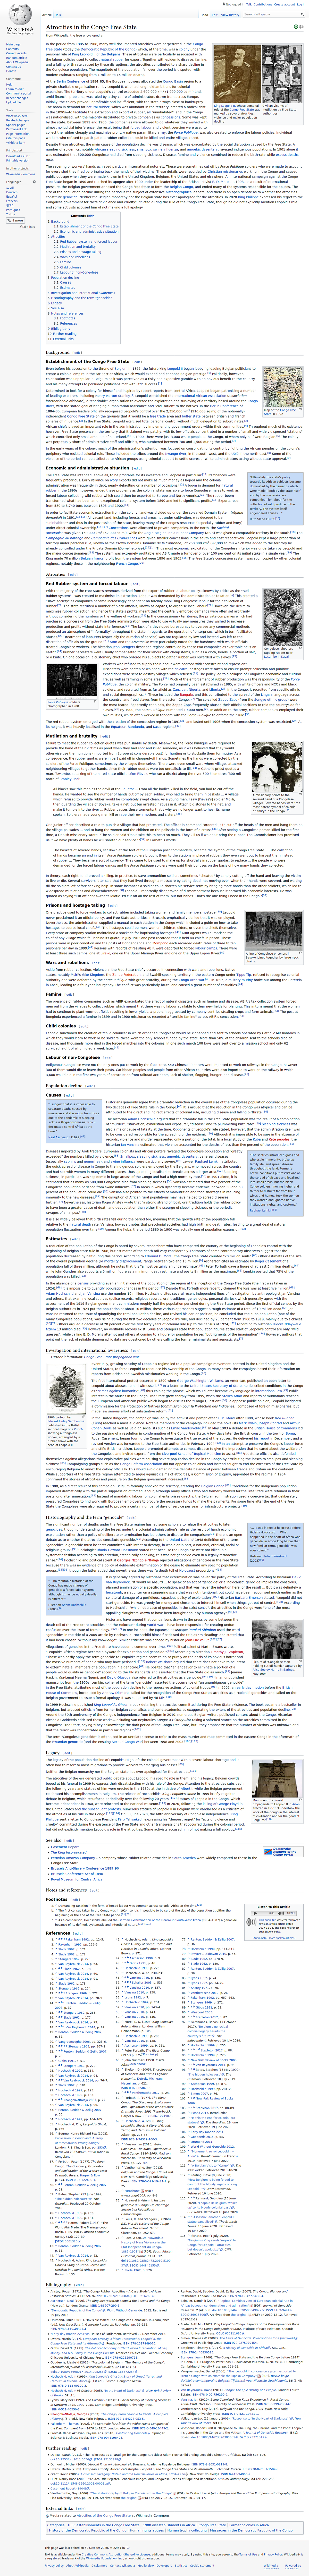 File:Wikipedia Congolese genocide denial.png